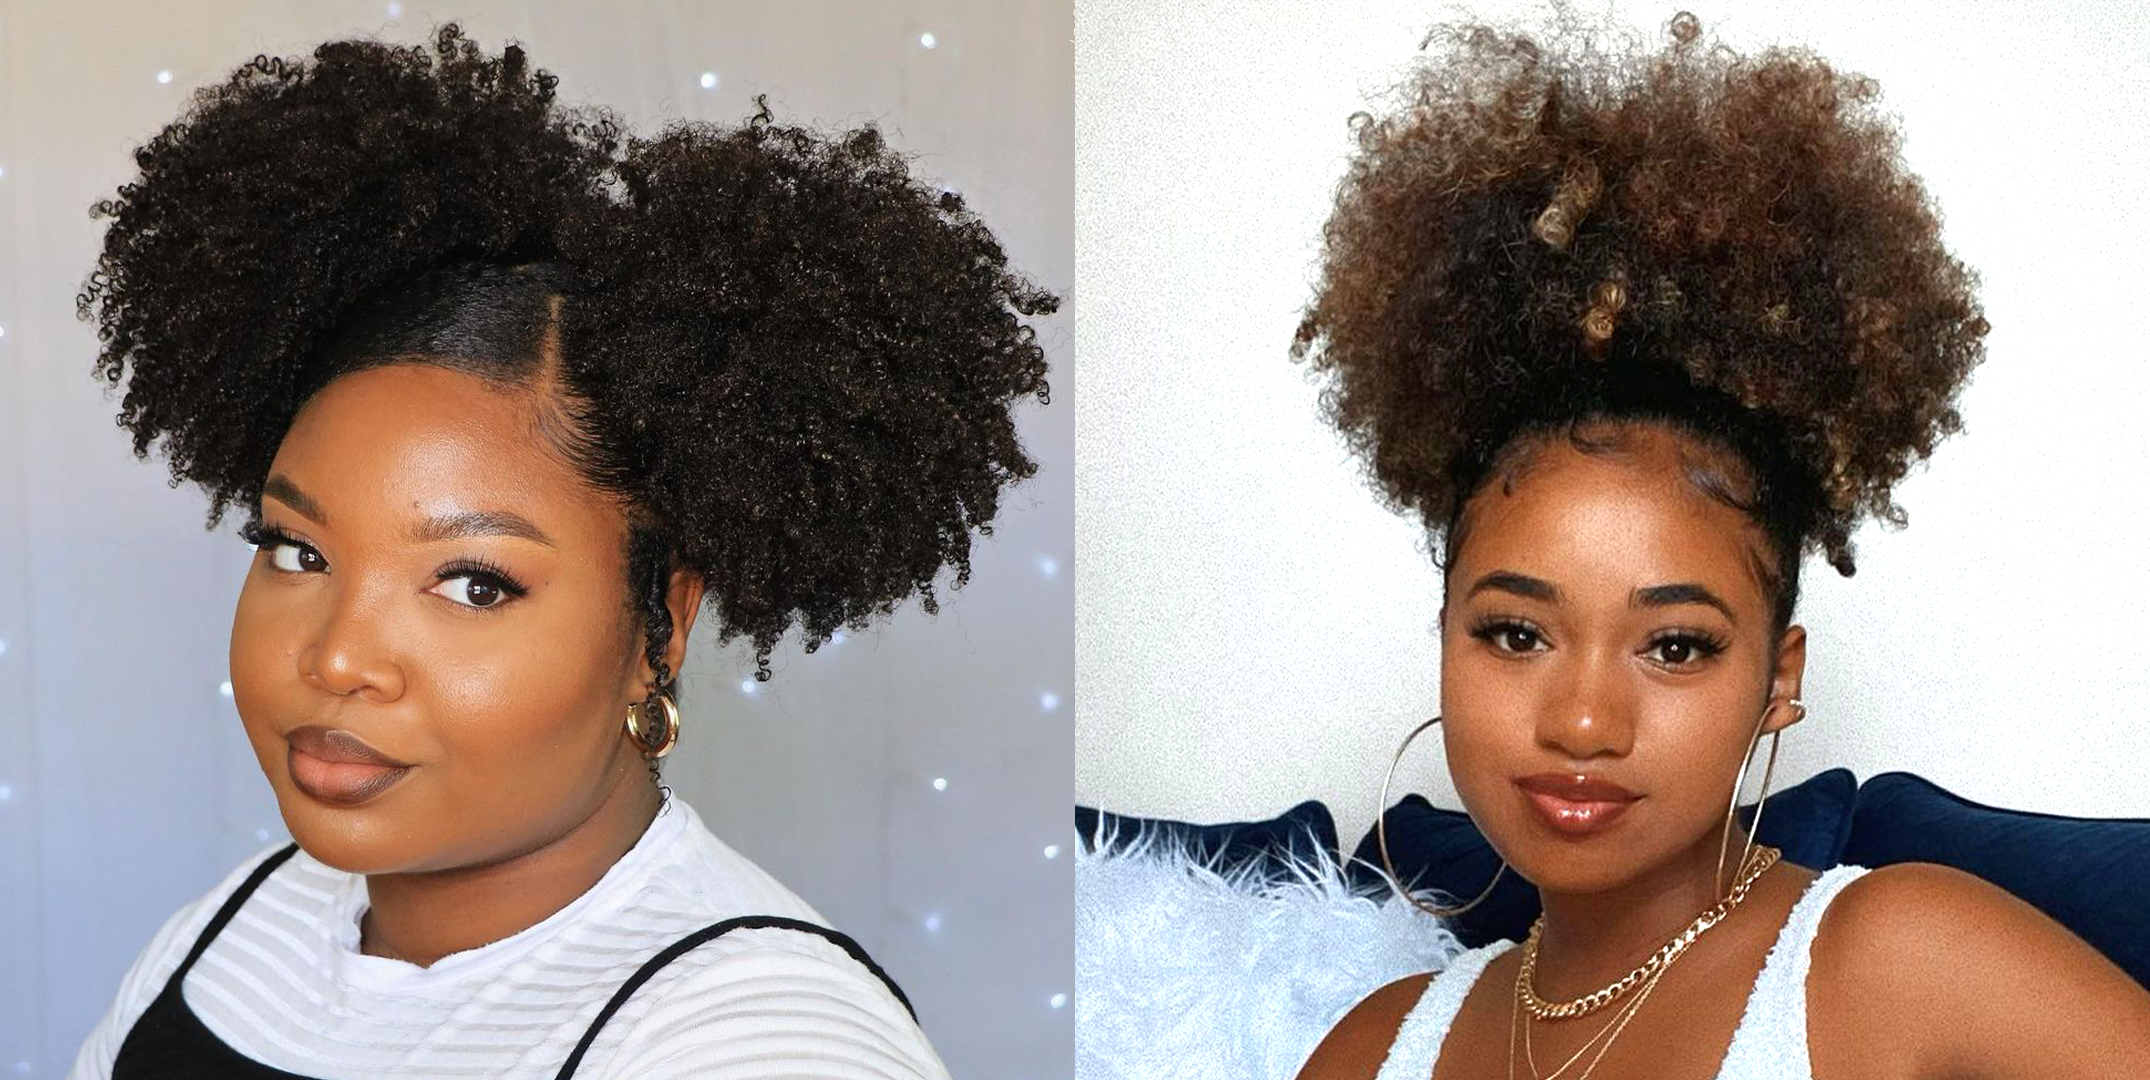 Afro puff - quick hairstyle for black women - Afroculture.net